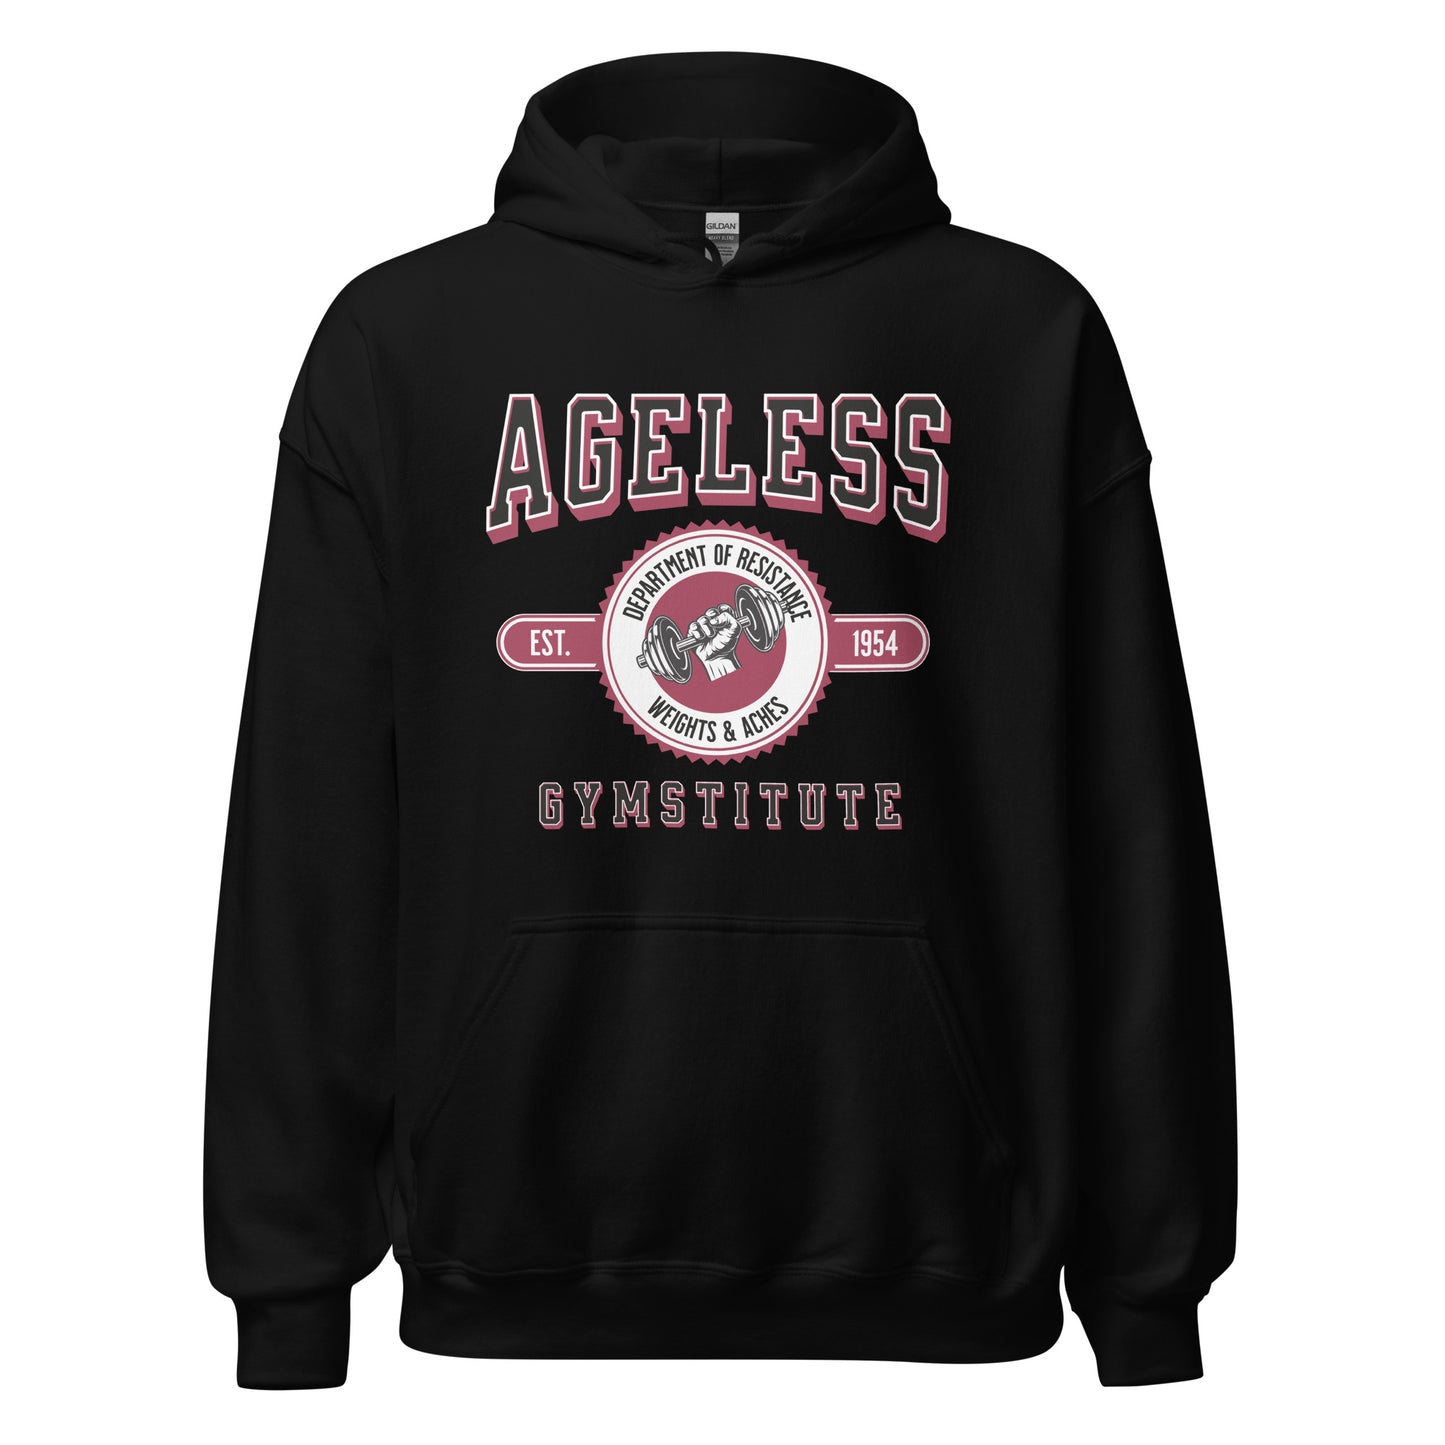 Ageless Gymstitute: Weights and Aches Unisex Hoodie